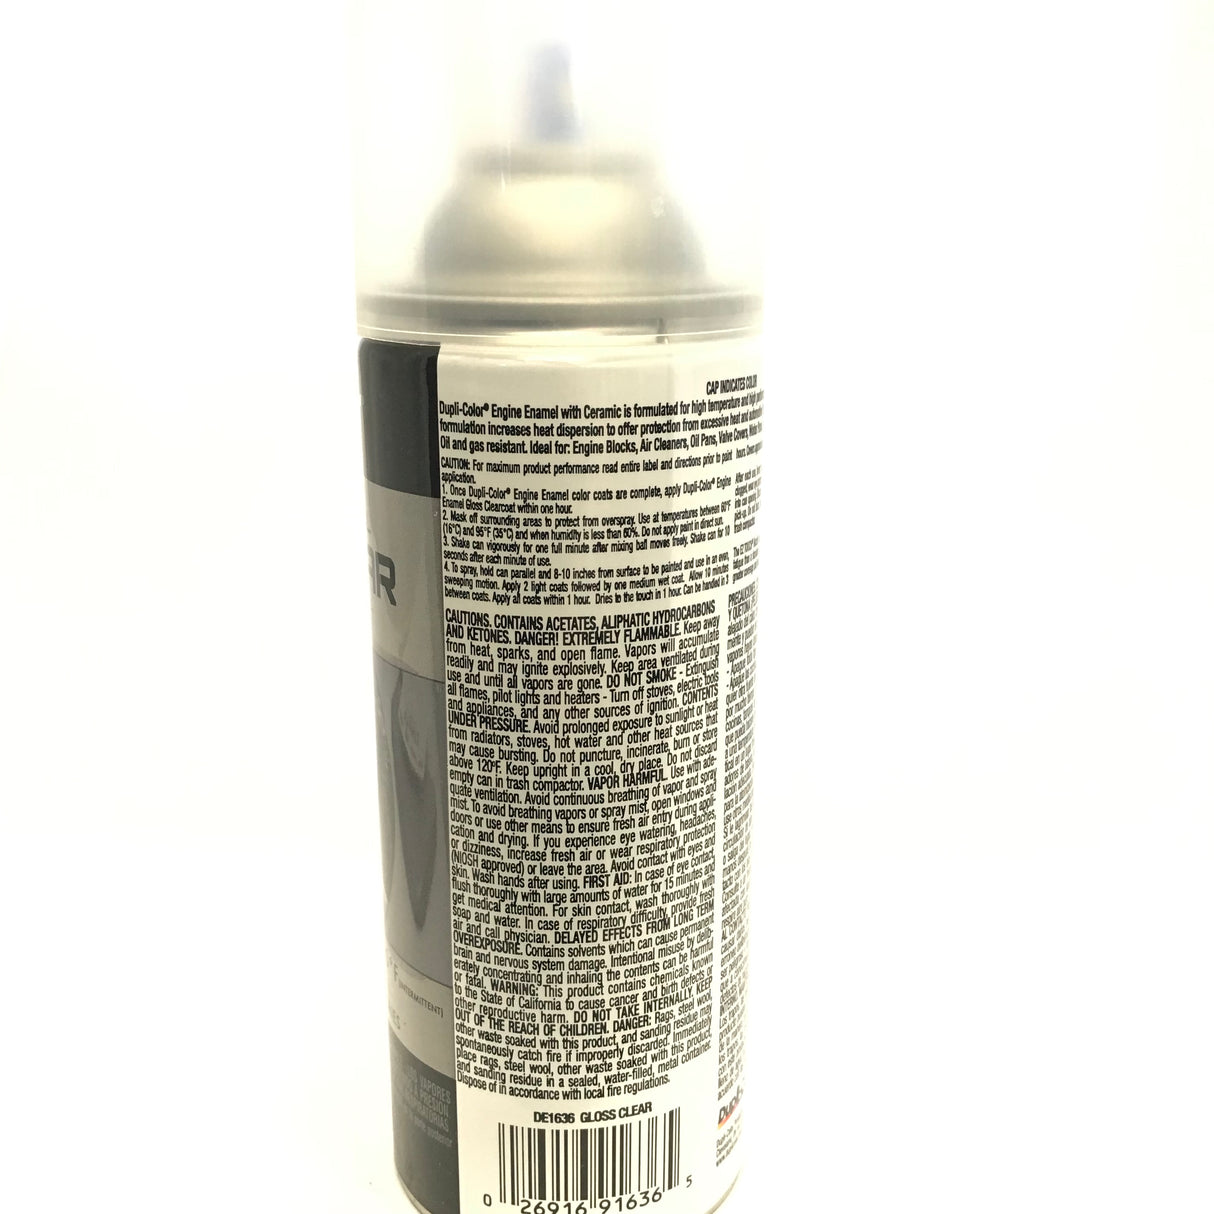 Duplicolor DE1636-2 PACK Engine Enamel with Ceramic Gloss Clear color - 12 oz Aerosol Can